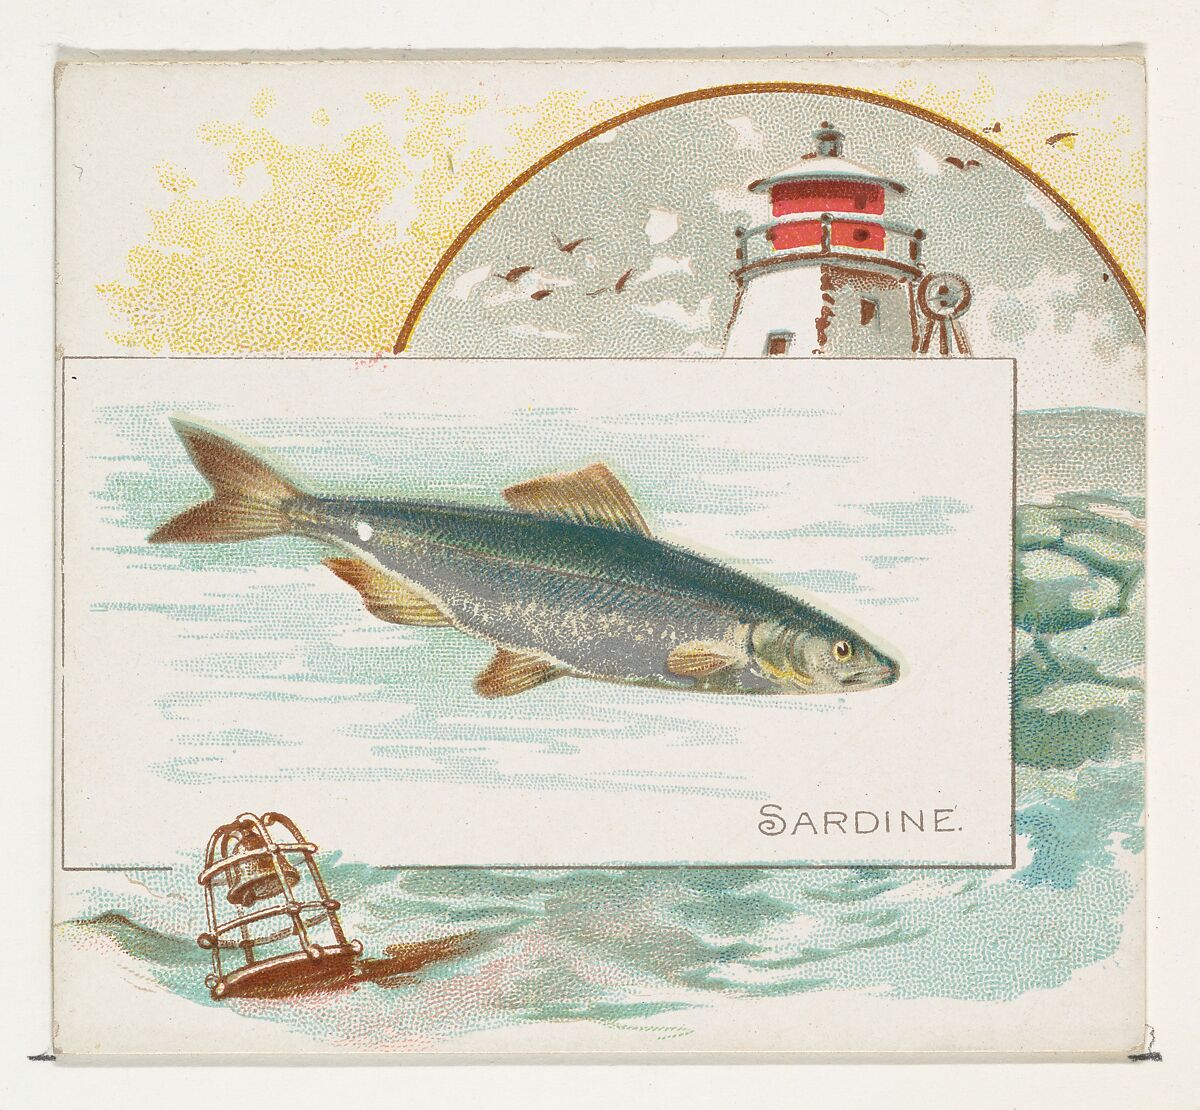 Sardine, from Fish from American Waters series (N39) for Allen & Ginter Cigarettes, Issued by Allen &amp; Ginter (American, Richmond, Virginia), Commercial color lithograph 